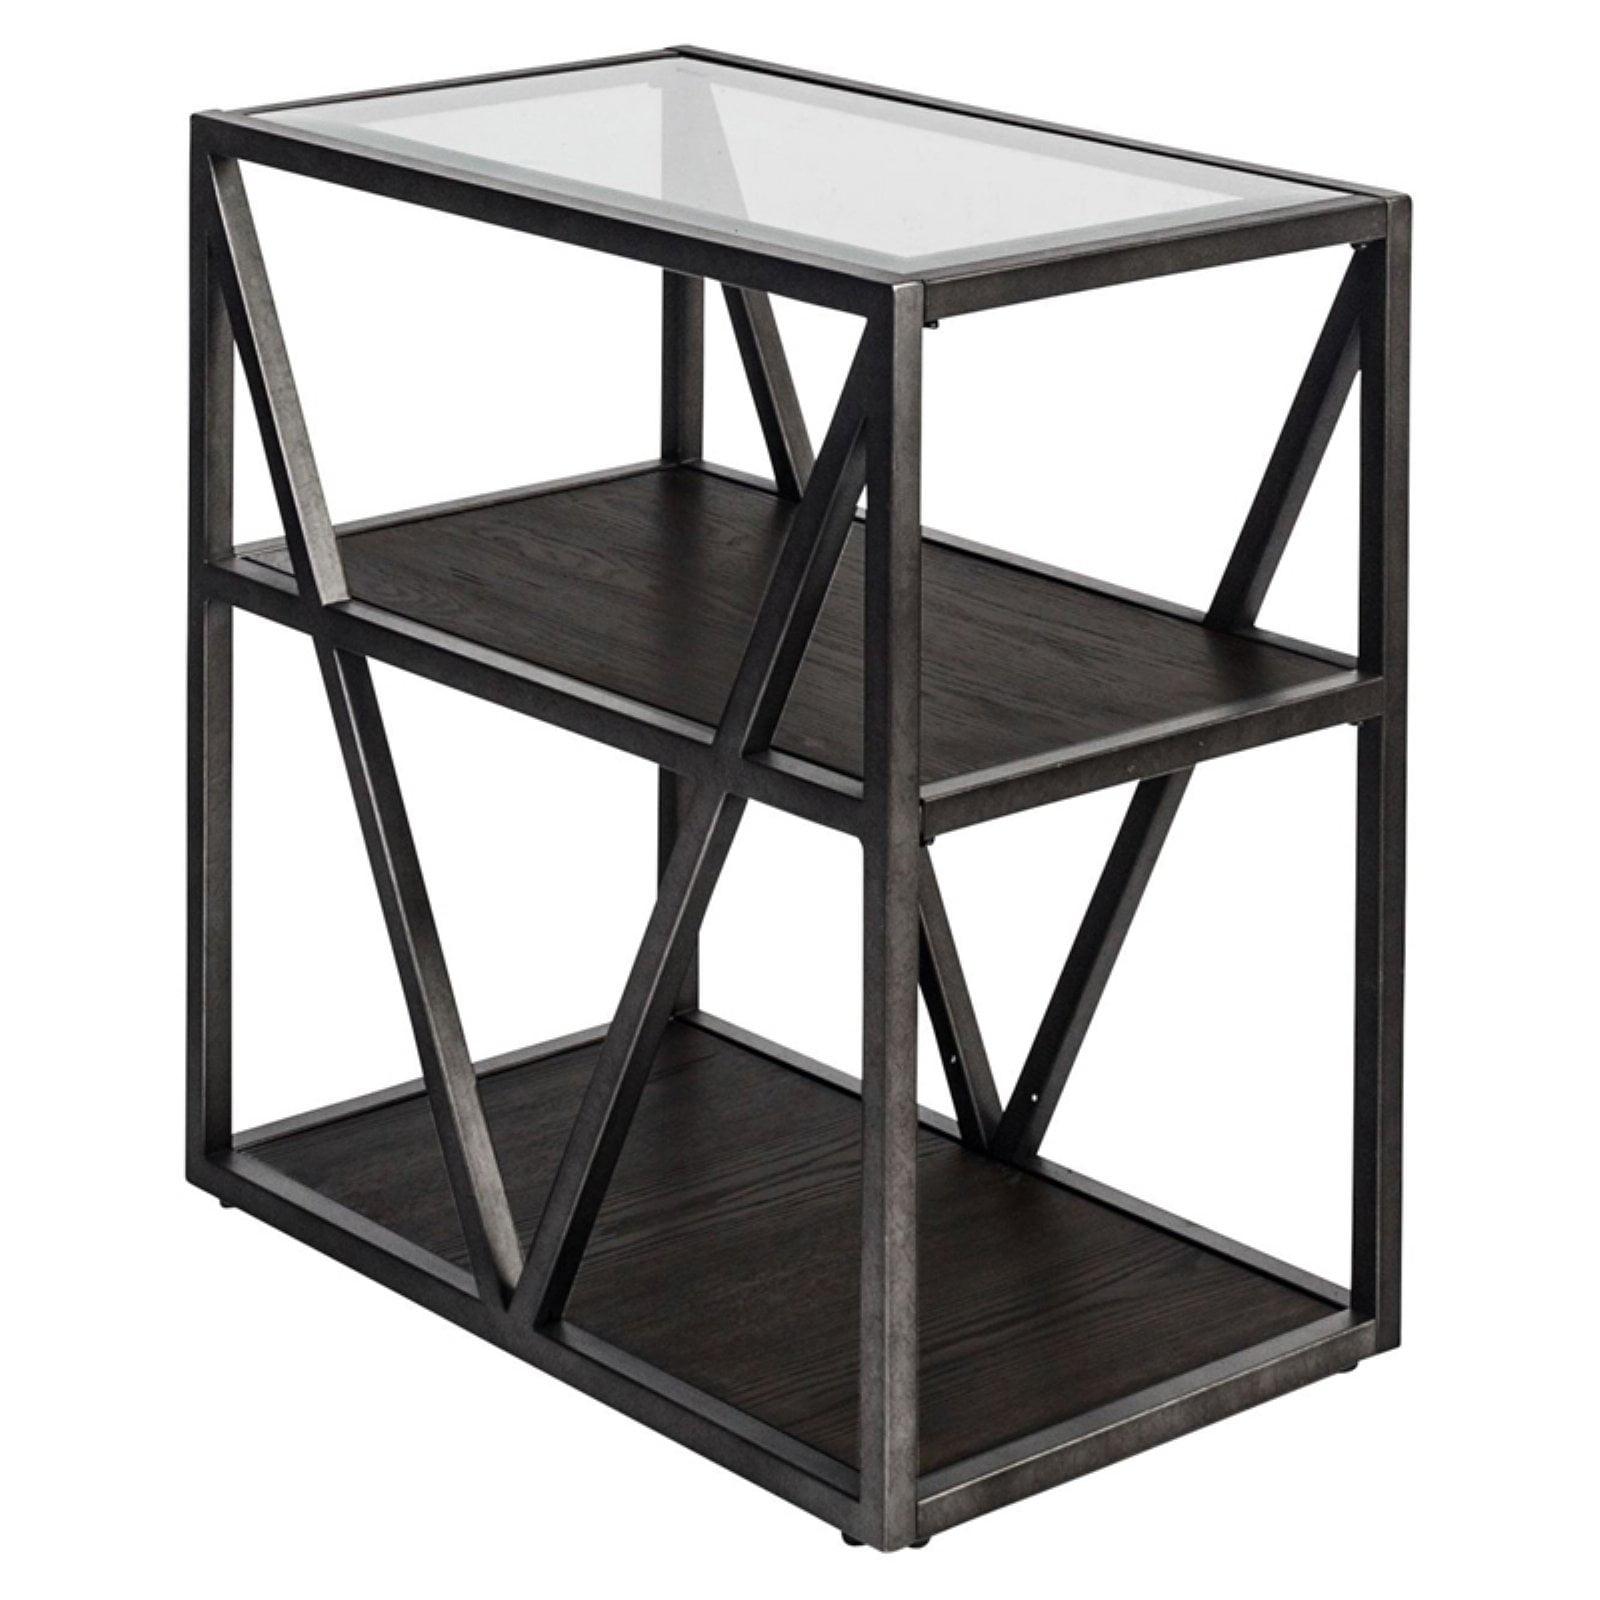 Arista Contemporary Gray Wood and Metal Chairside Table